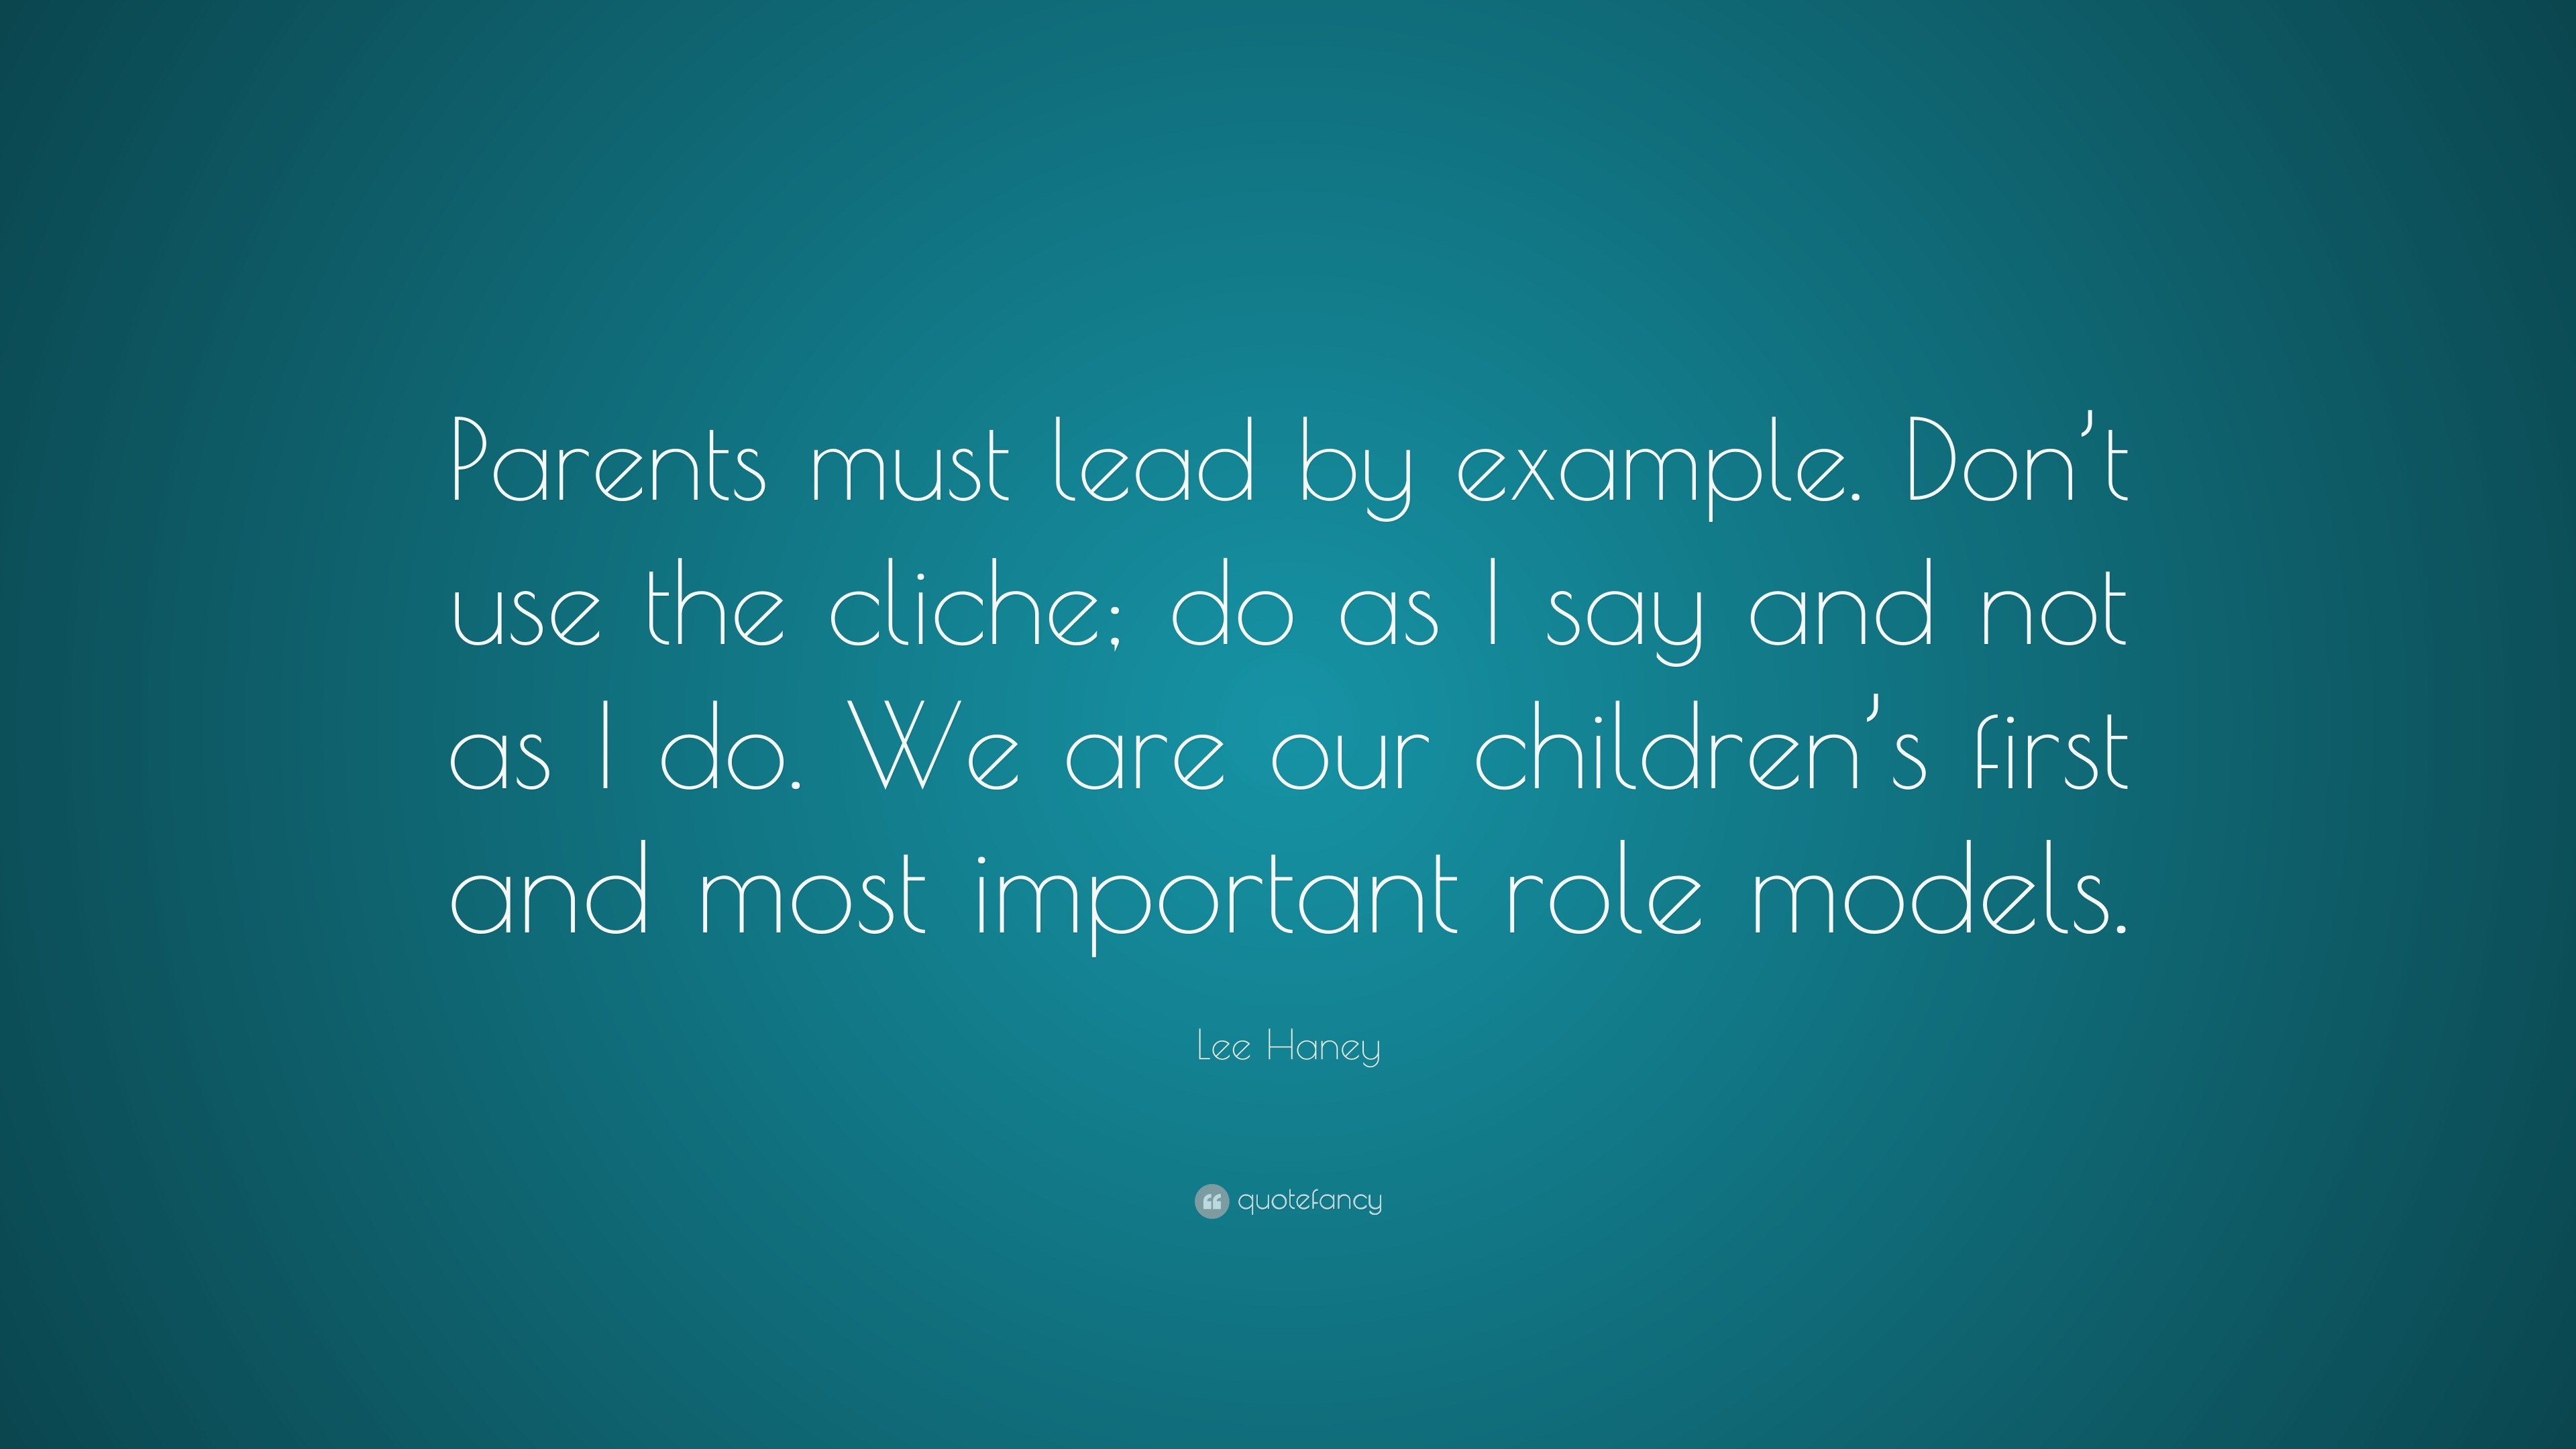 Lee Haney Quote: “Parents must lead by example. Don’t use the cliche ...